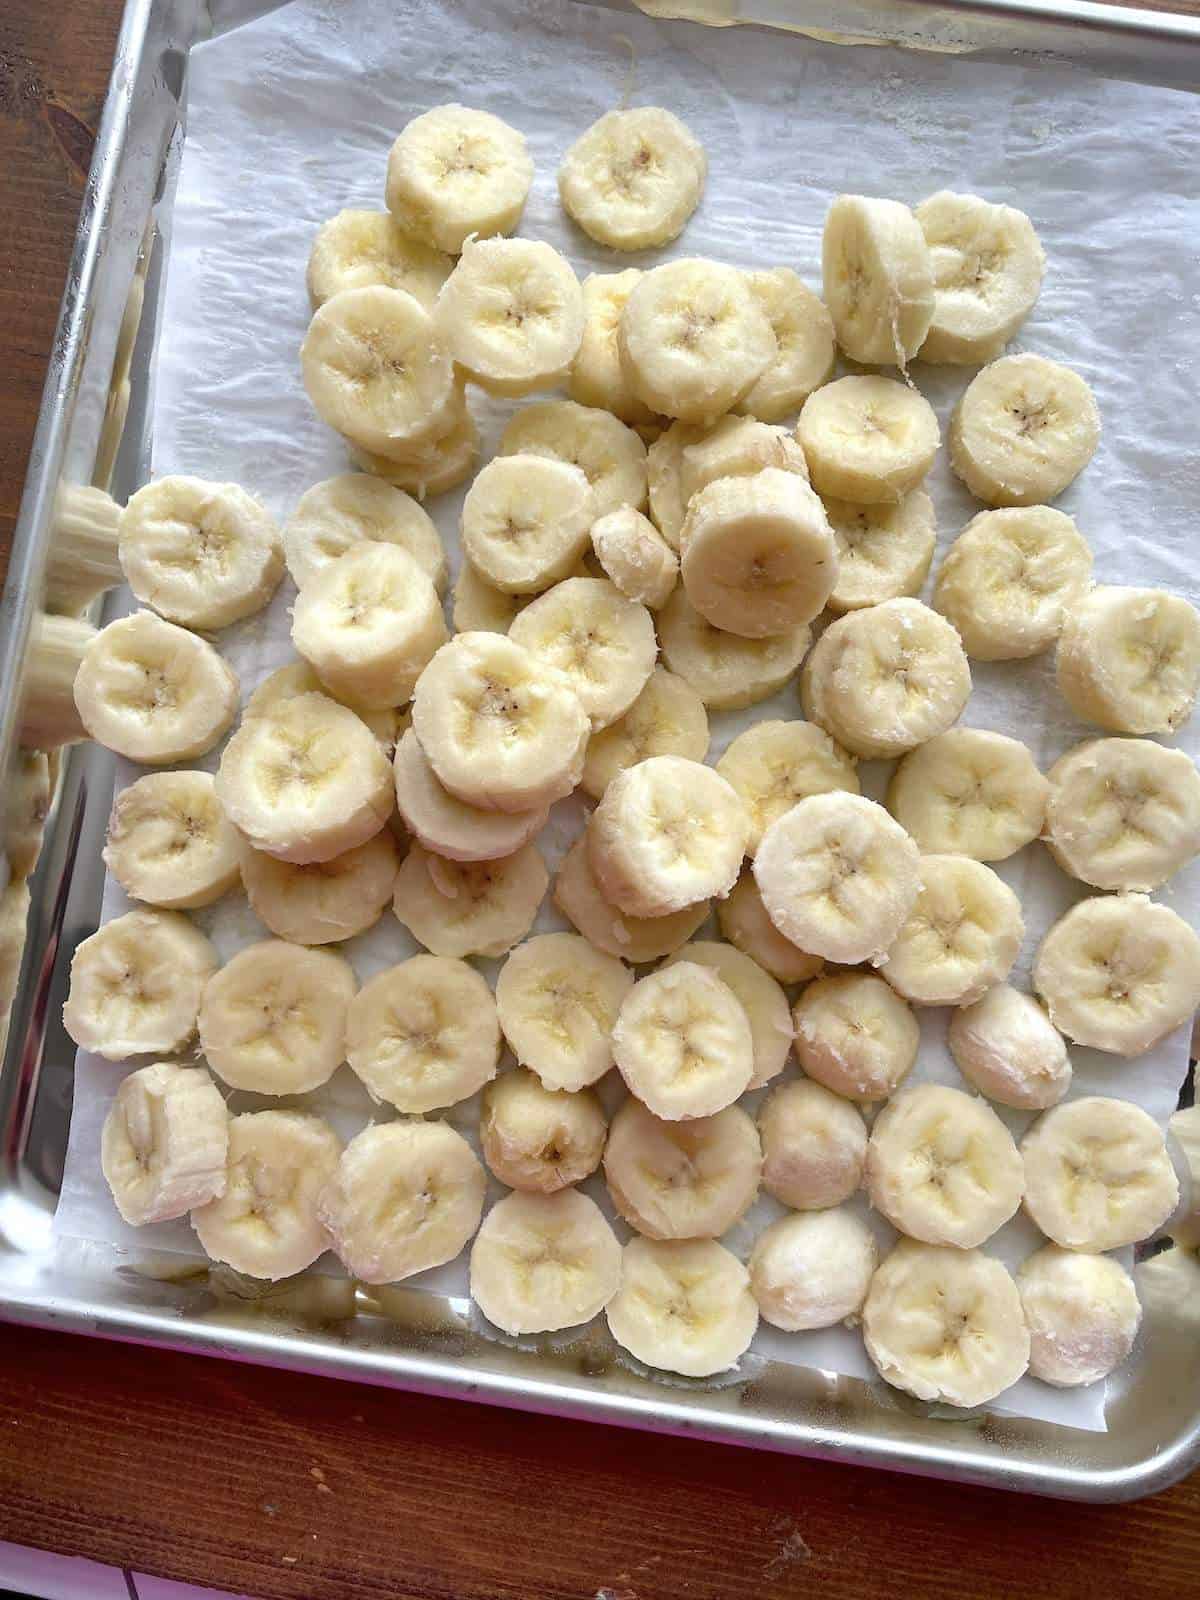 Slices of frozen bananas on a parchment paper lined baking sheet.